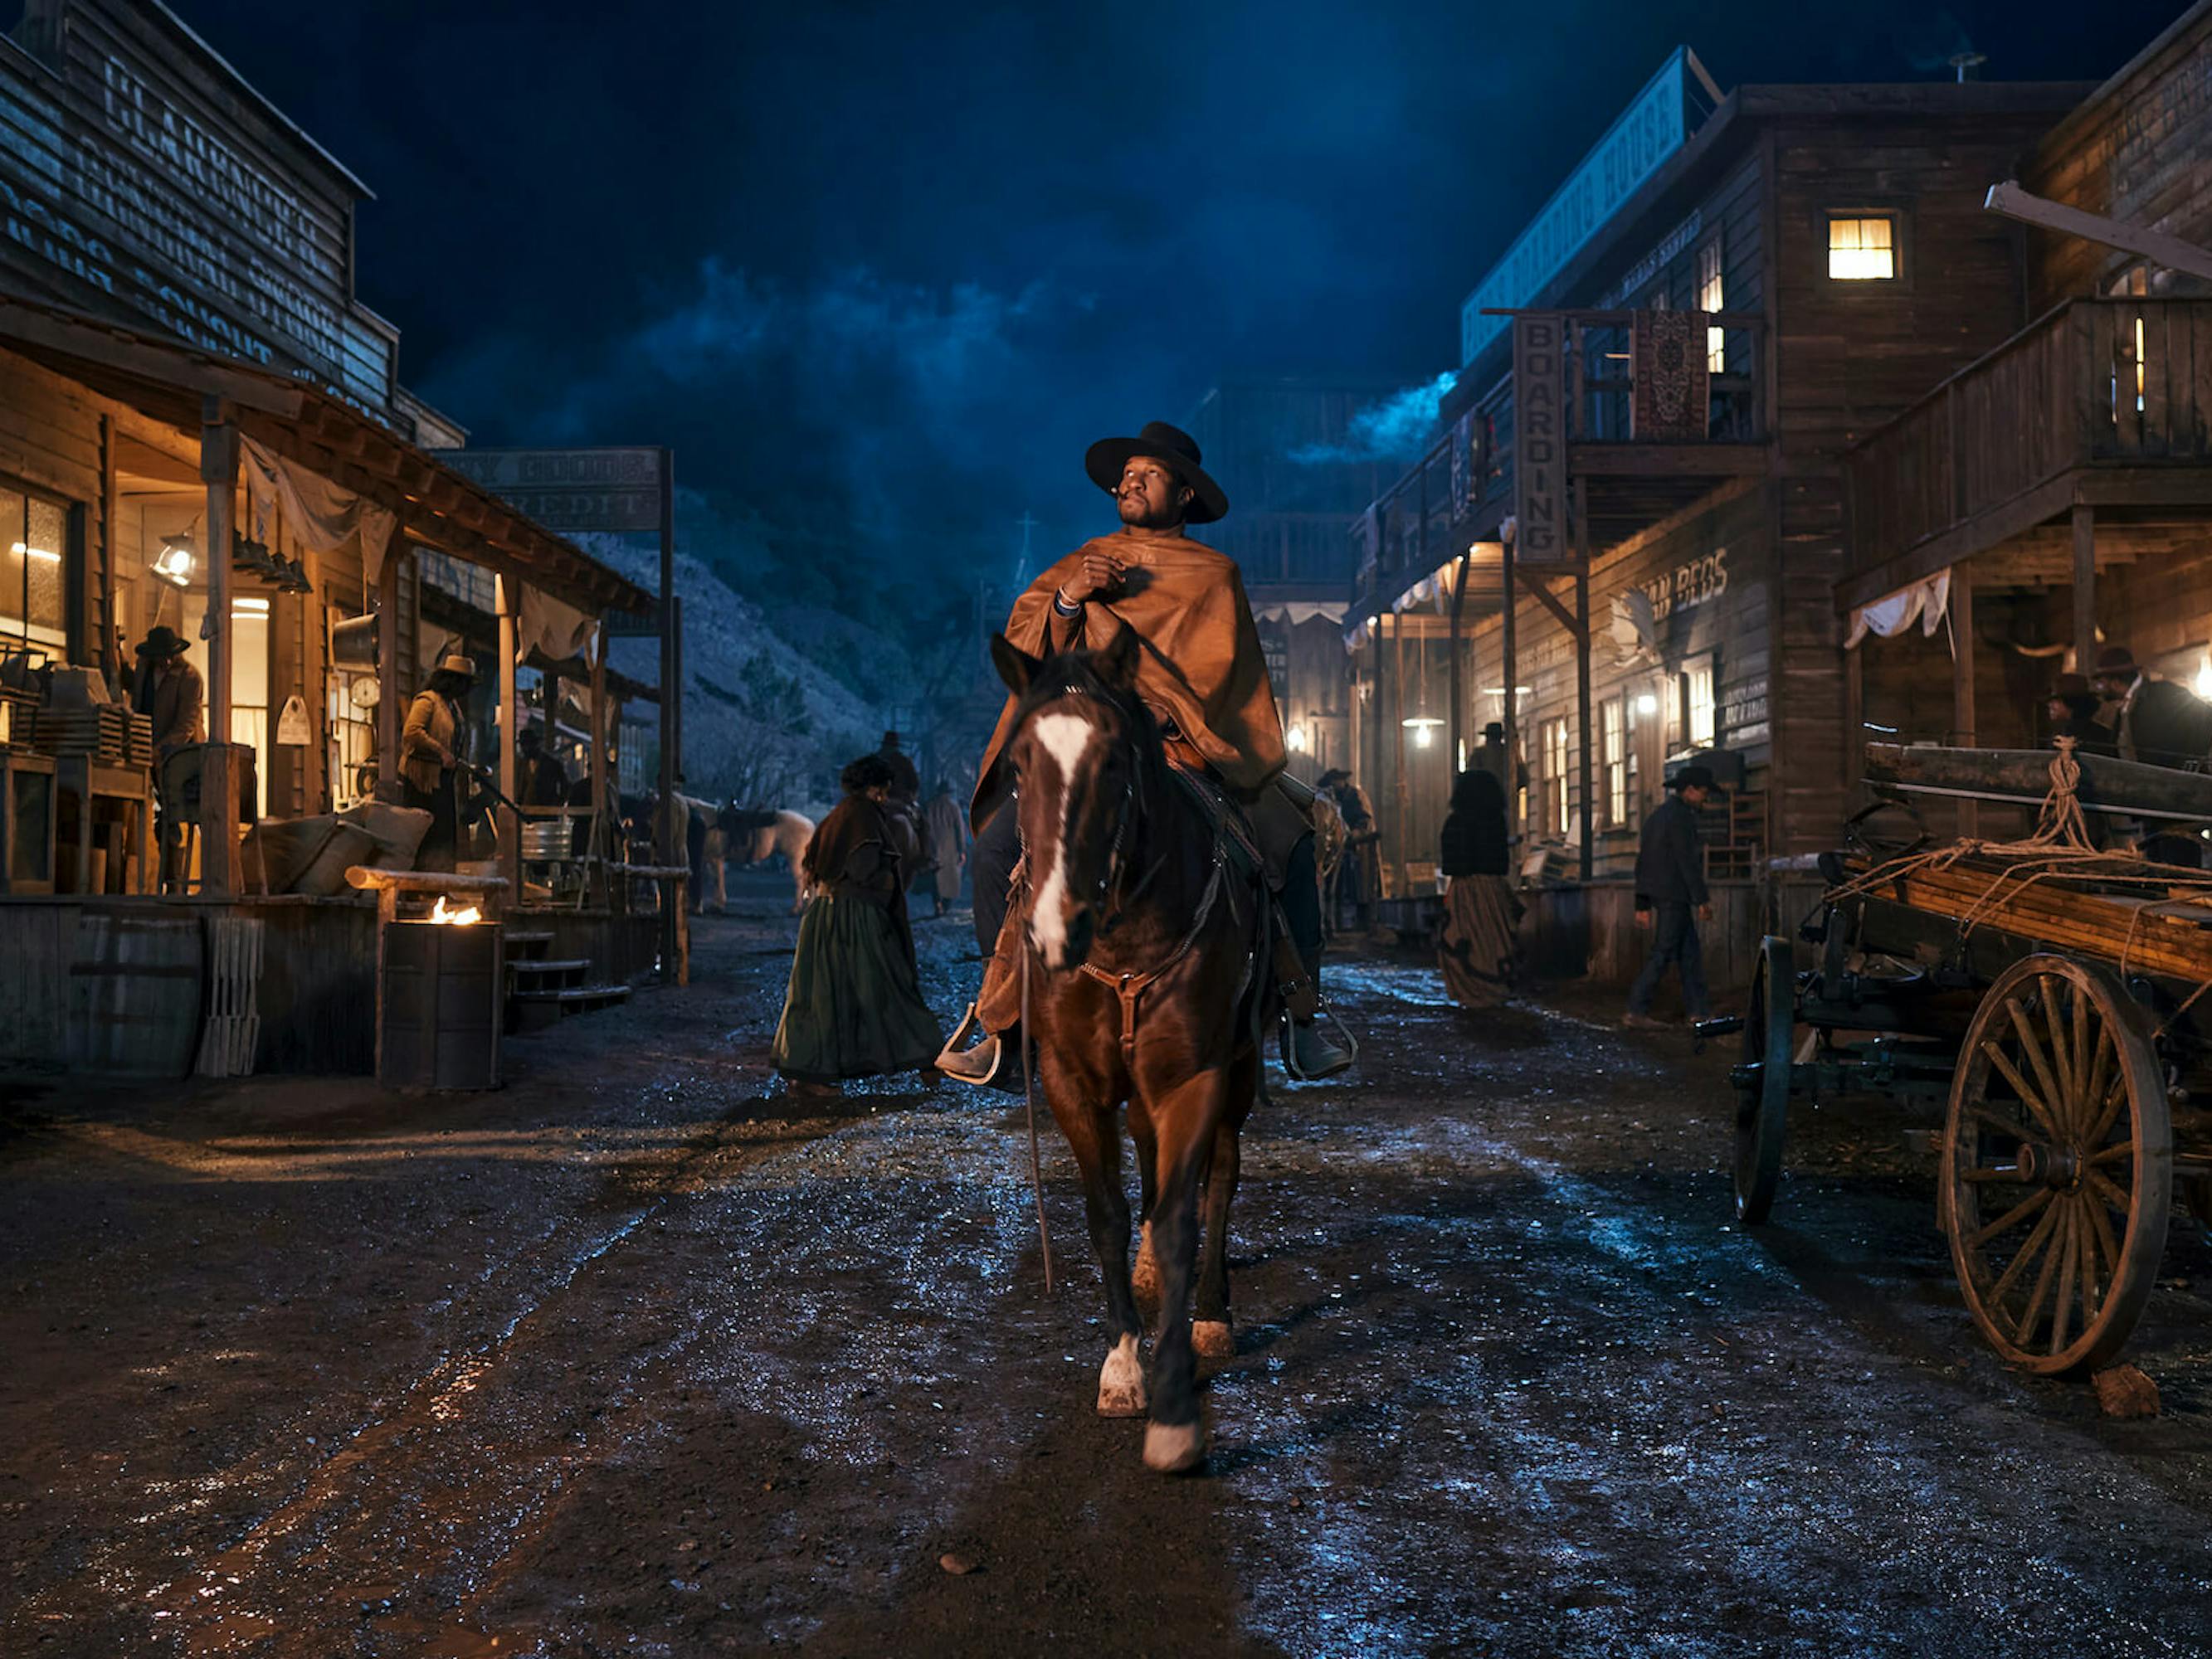 Nat Love (Jonathan Majors) rides a beautiful brown and white horse through a muddy street at nighttime. The scene is lit by house lights on either side of Majors path, and people mingle about. Majors smokes and wears a wide brimmed hat and poncho.